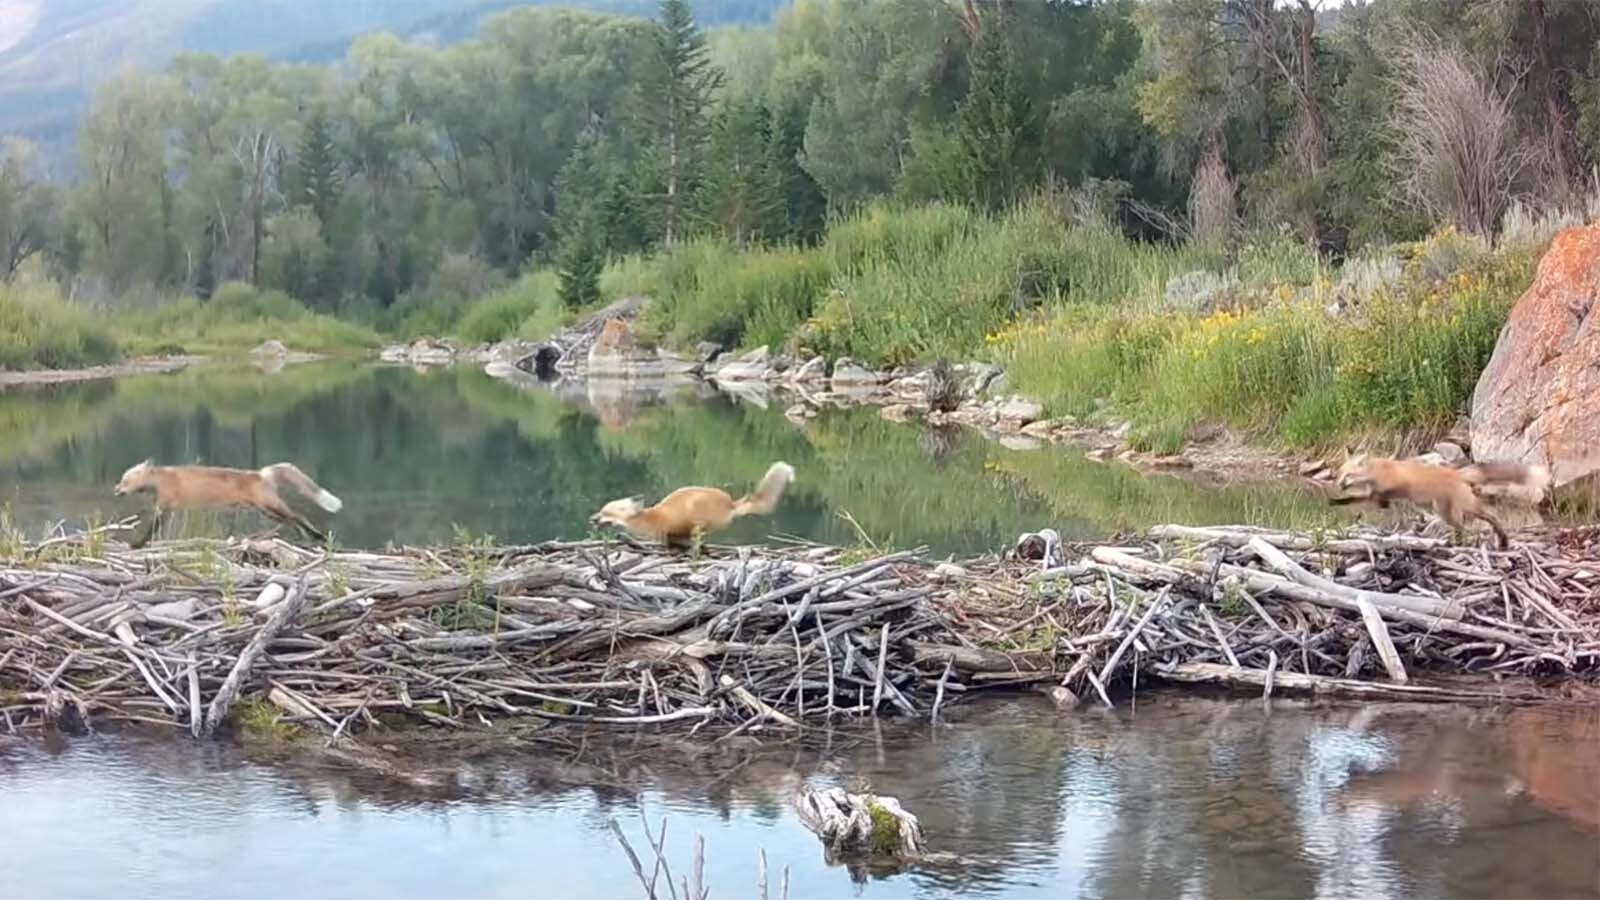 A family of foxes find this beaver dam handy for crossing this creek.